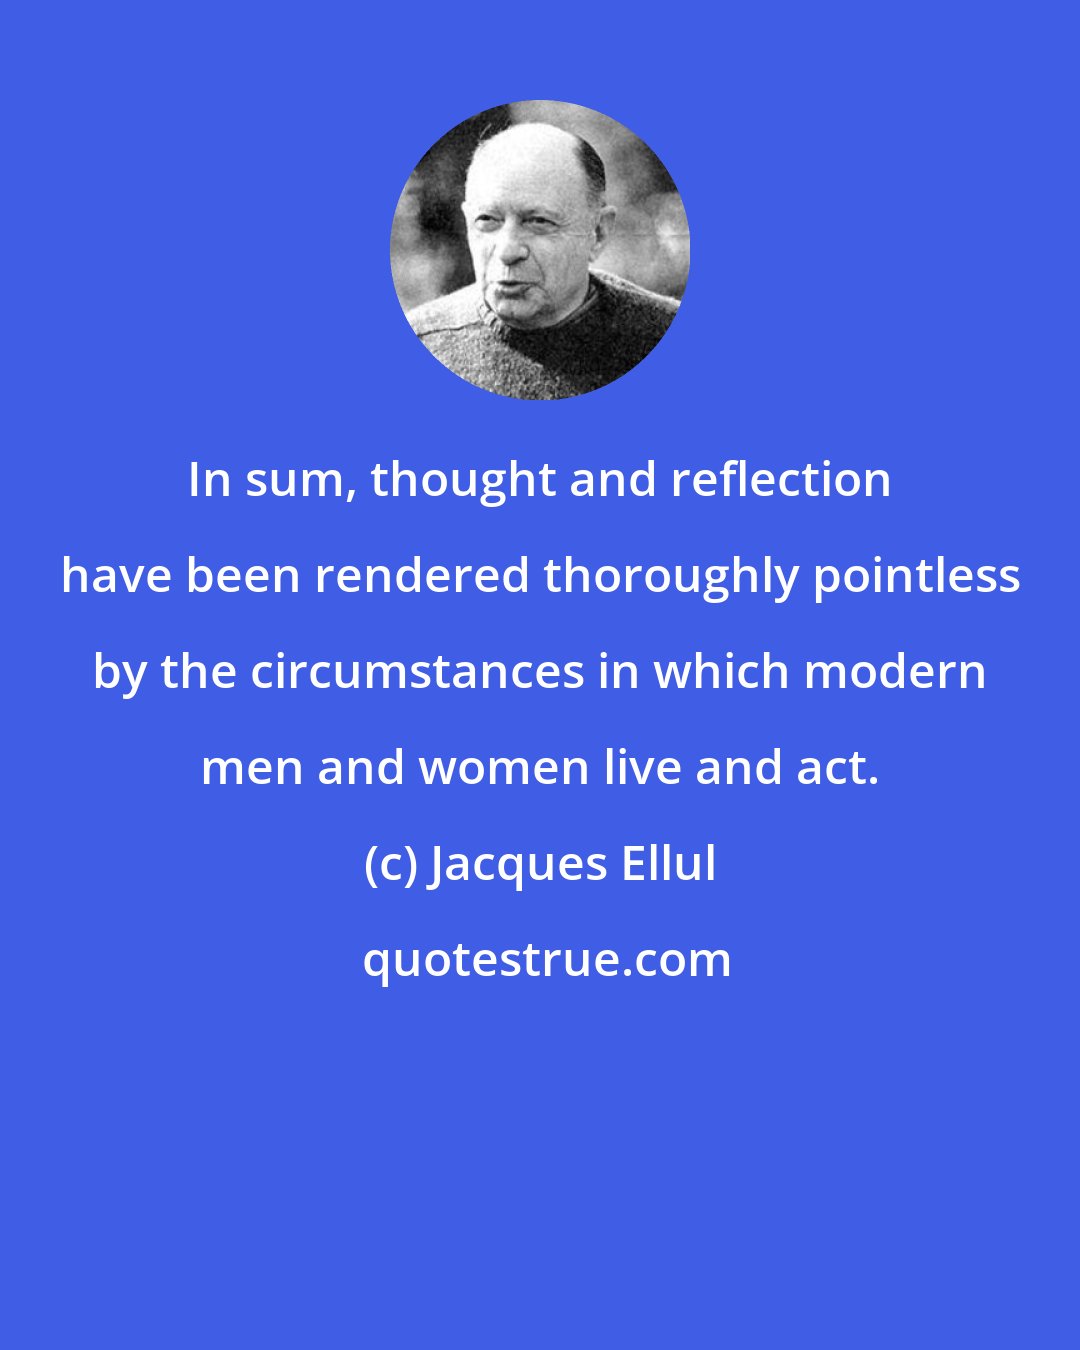 Jacques Ellul: In sum, thought and reflection have been rendered thoroughly pointless by the circumstances in which modern men and women live and act.